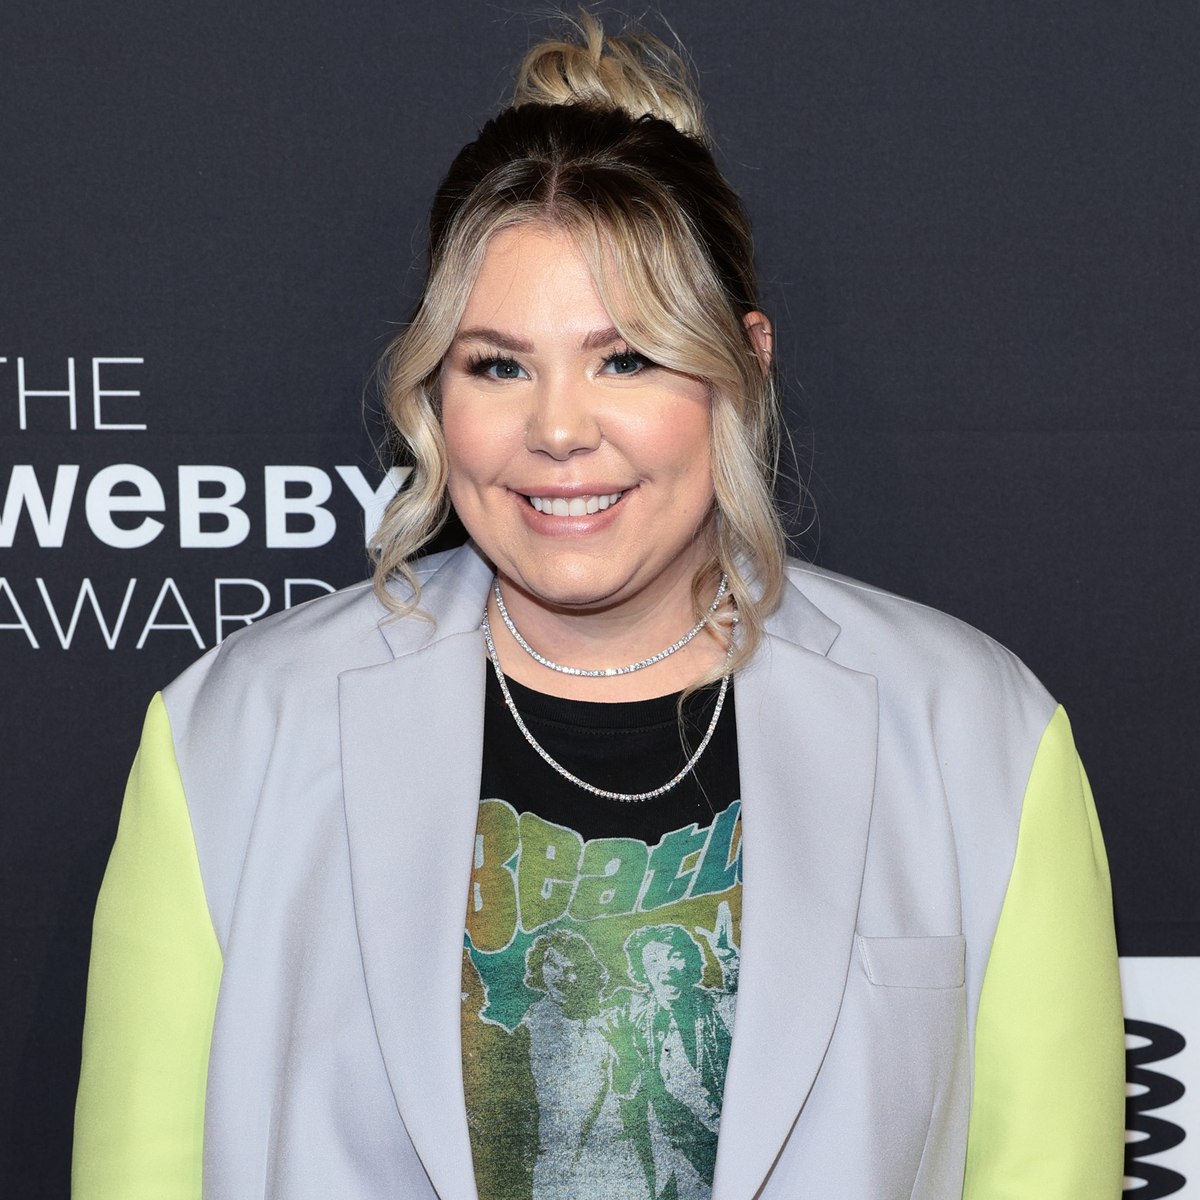 Pregnant Teen Mom Star Kailyn Lowry Teases Sex of Twins